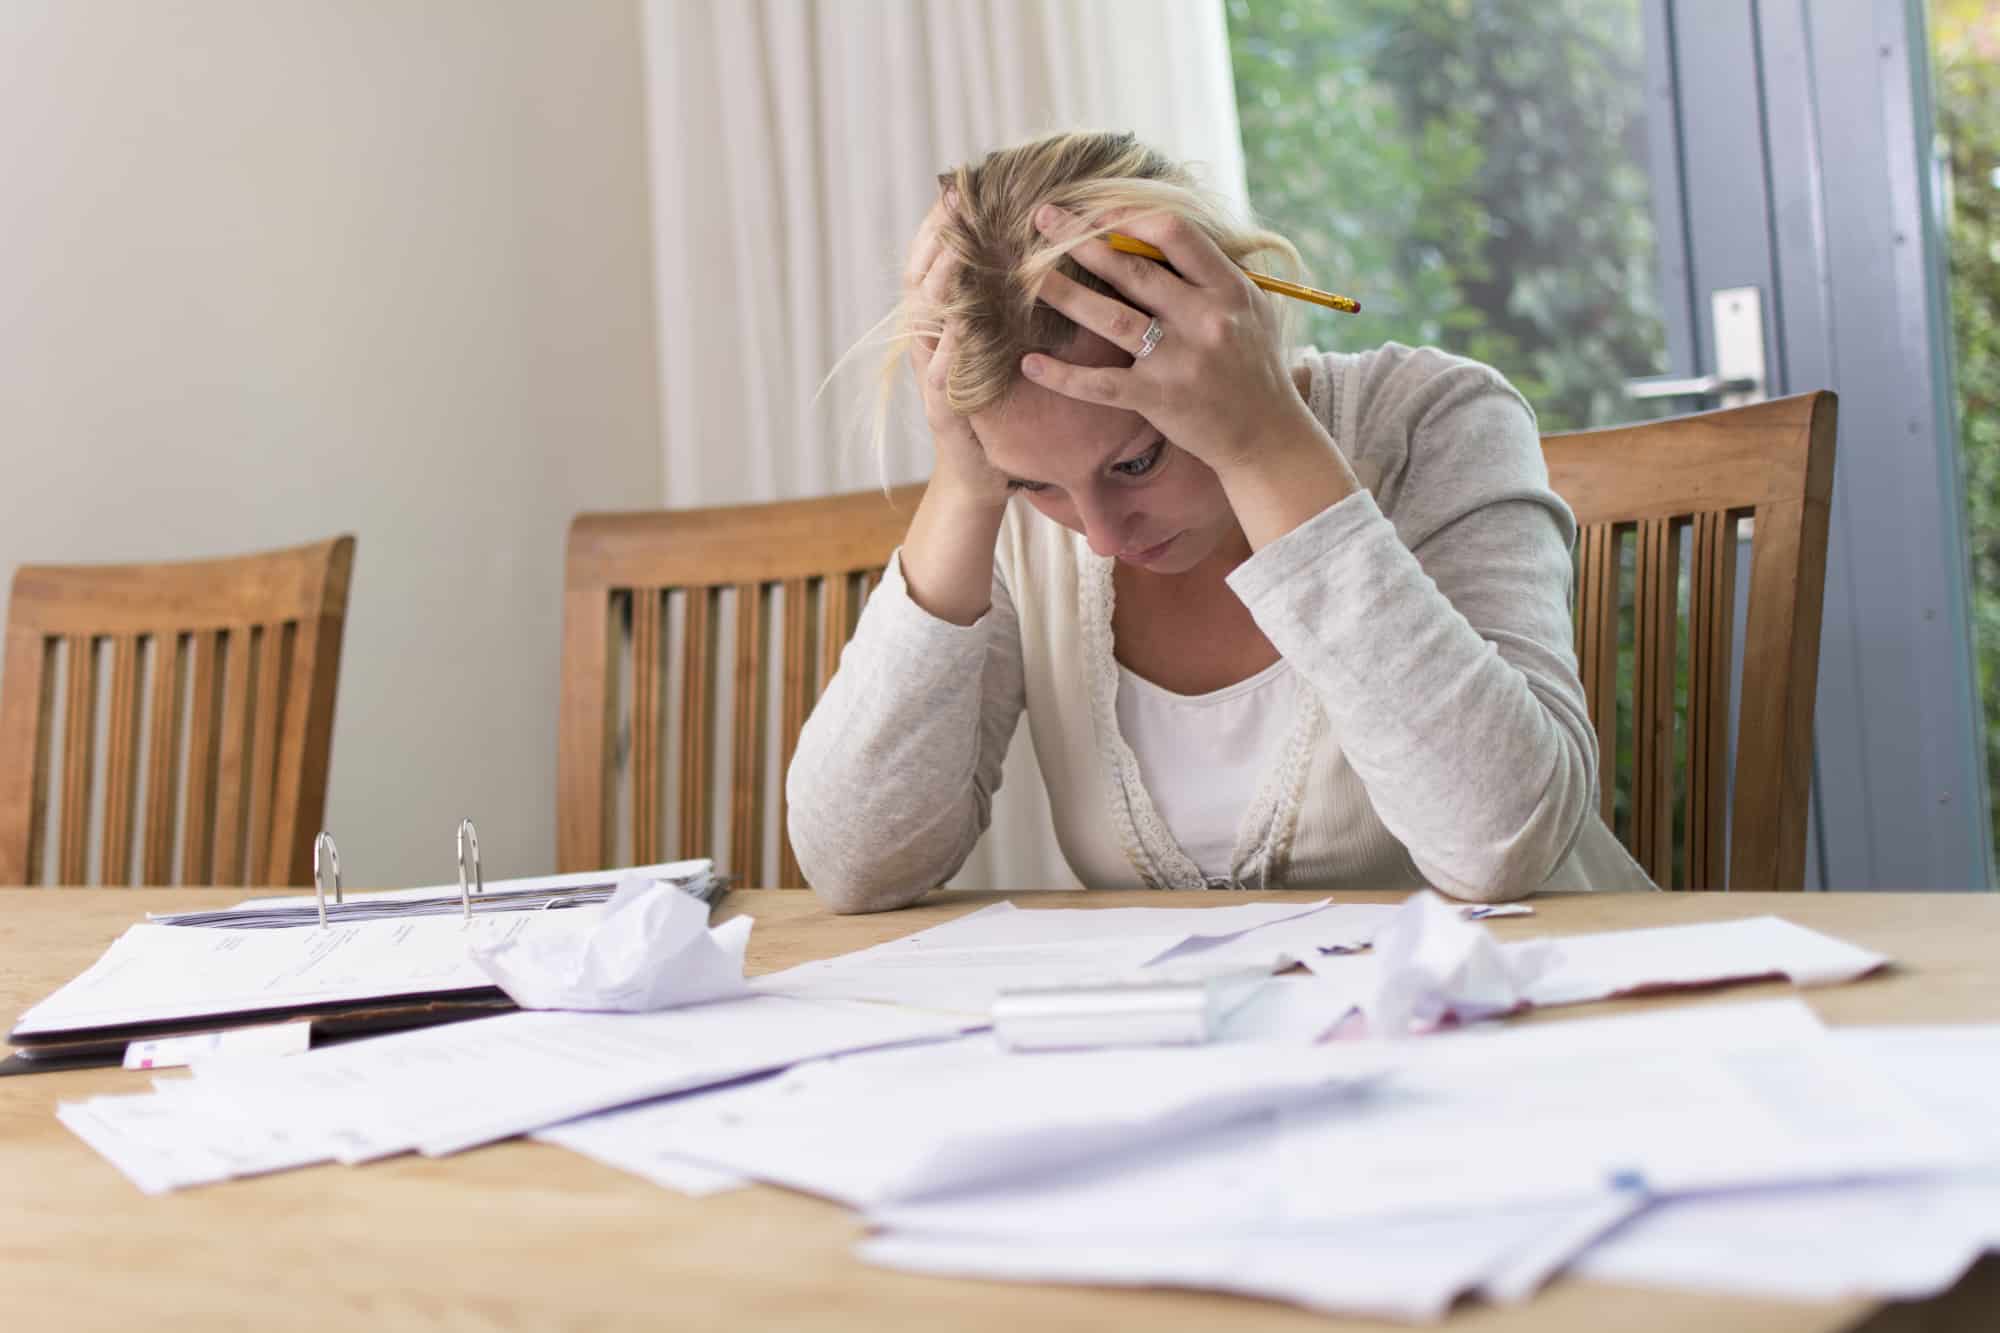 Older, blonde woman sitting at the dining room table holding her head in her hands with personal finances spread out.